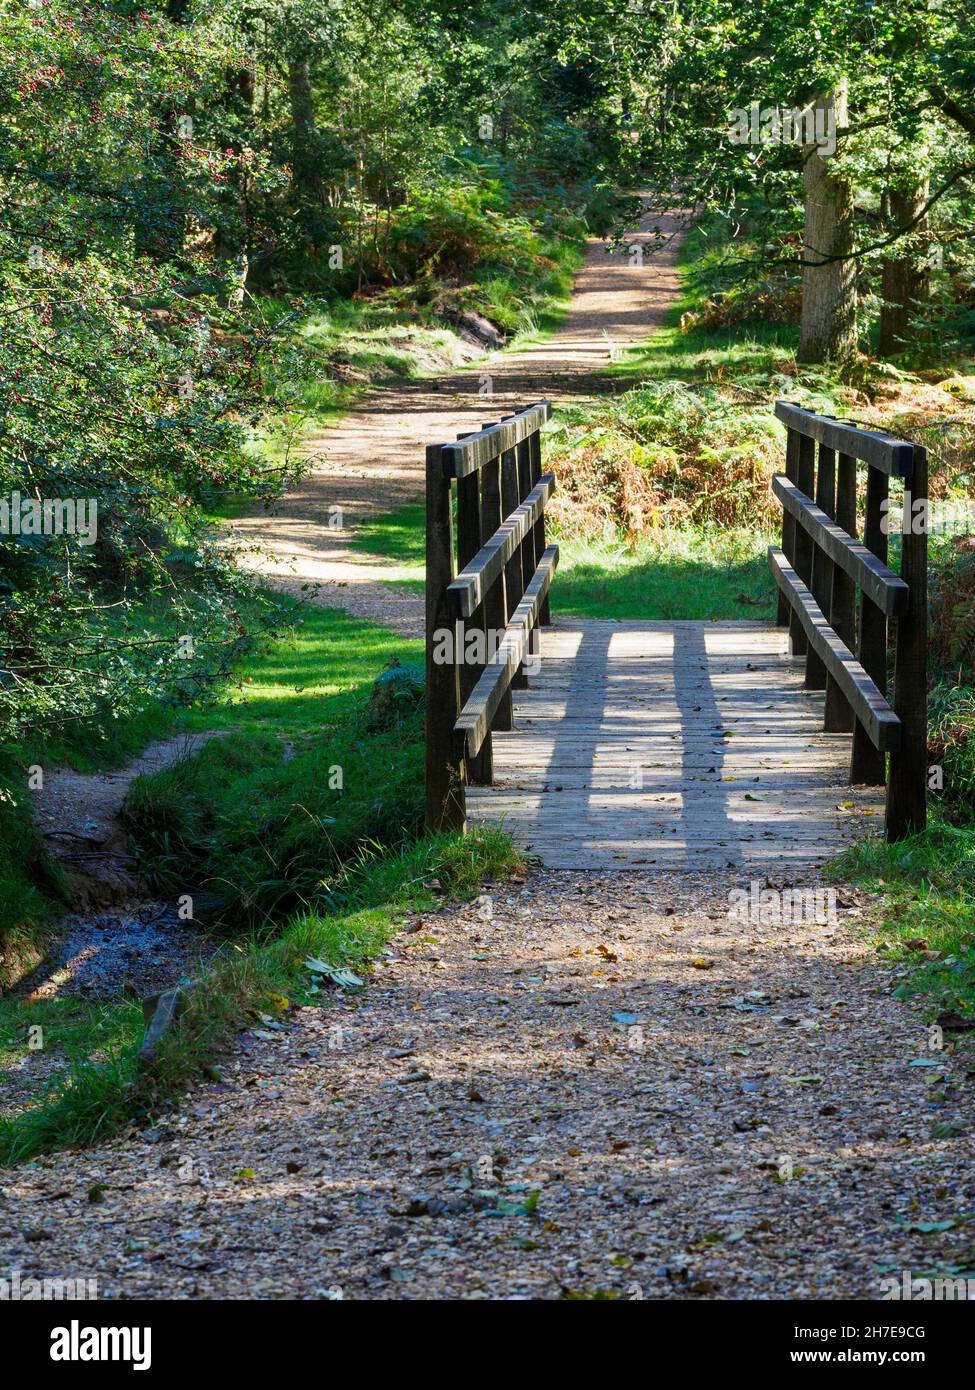 Footbridge over stream along a footpath through thewoods, Bolderwood, The New Forest, Hampshire, UK Stock Photo